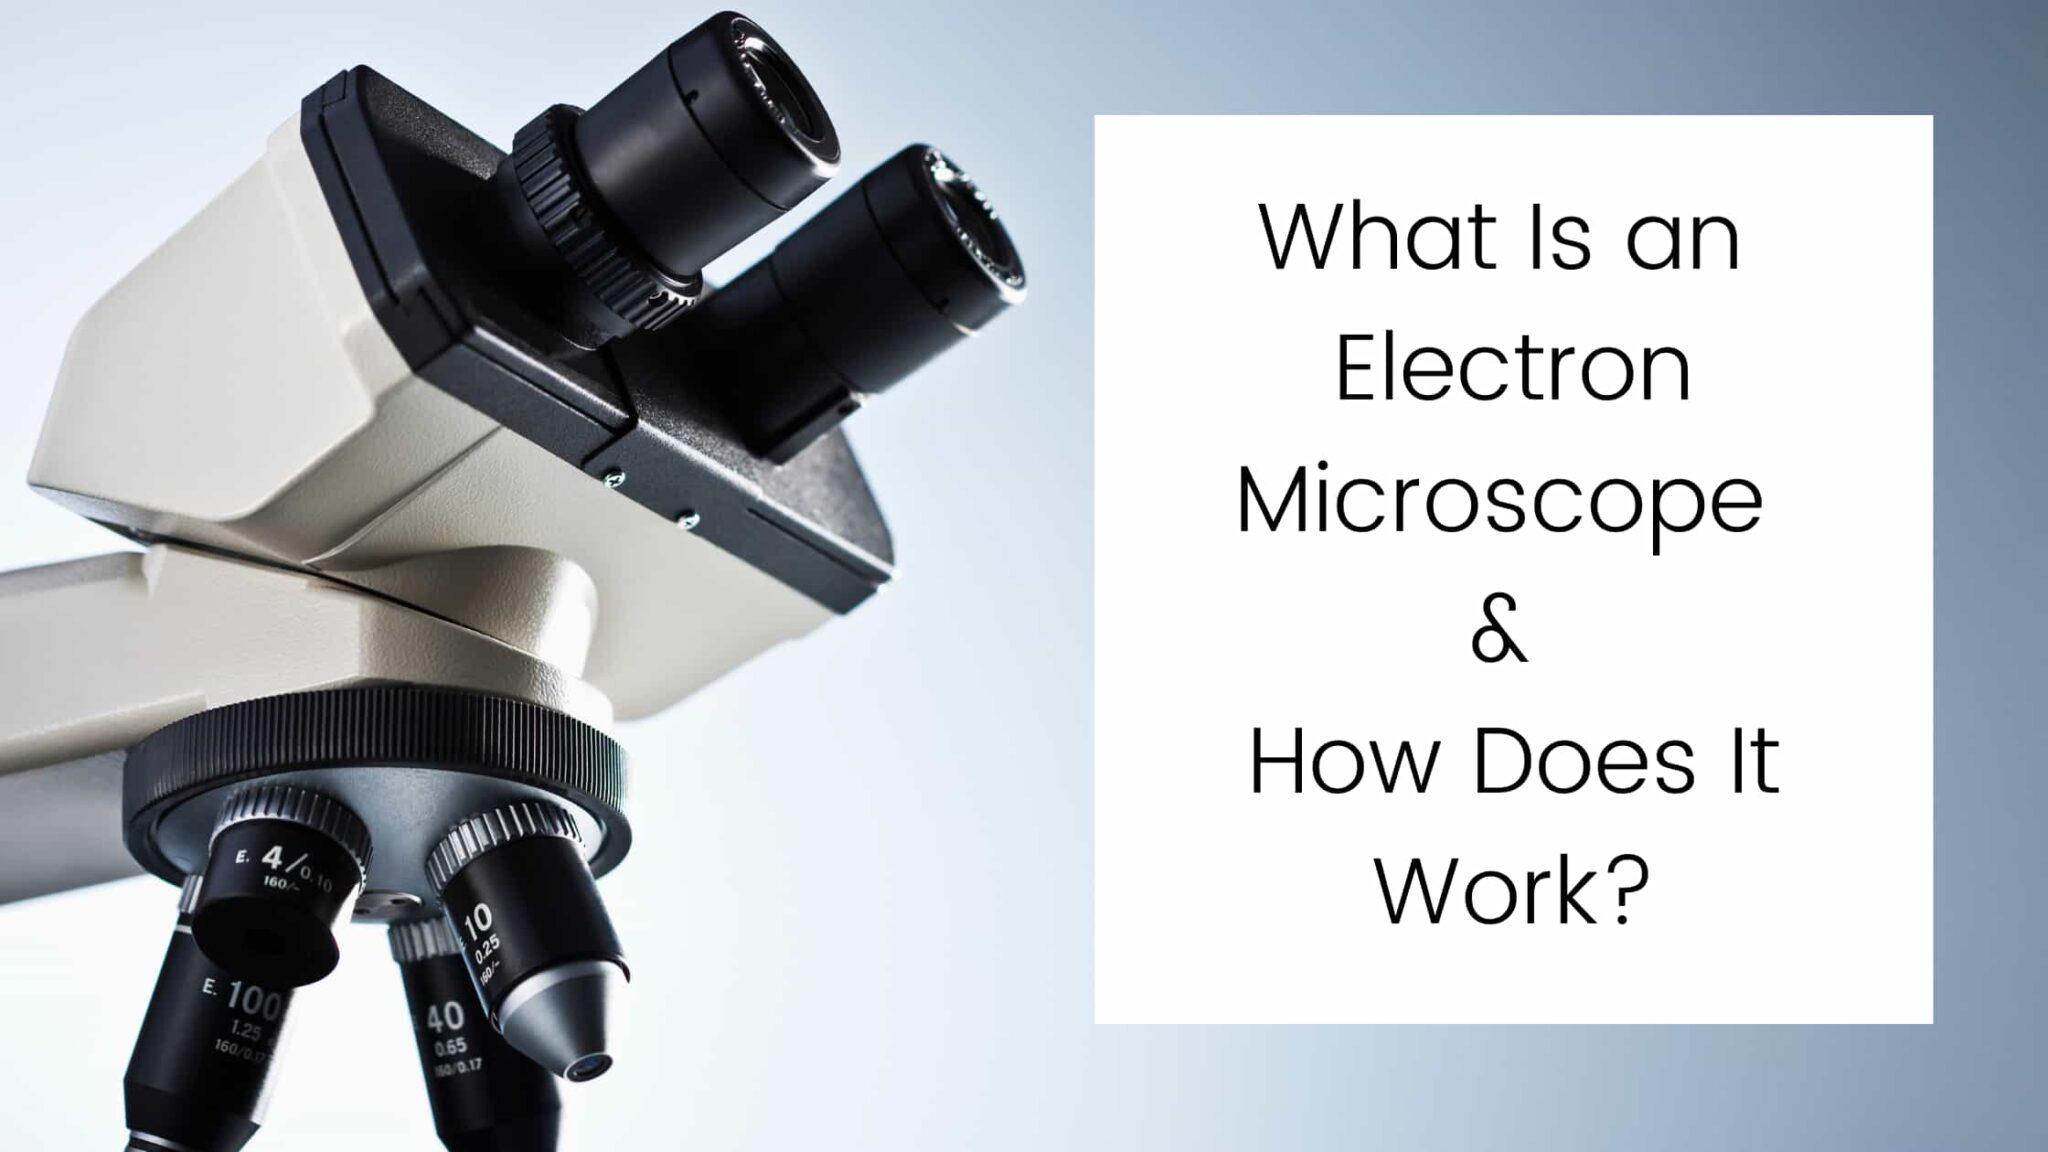 What is an Electron Microscope & How Does it Work?